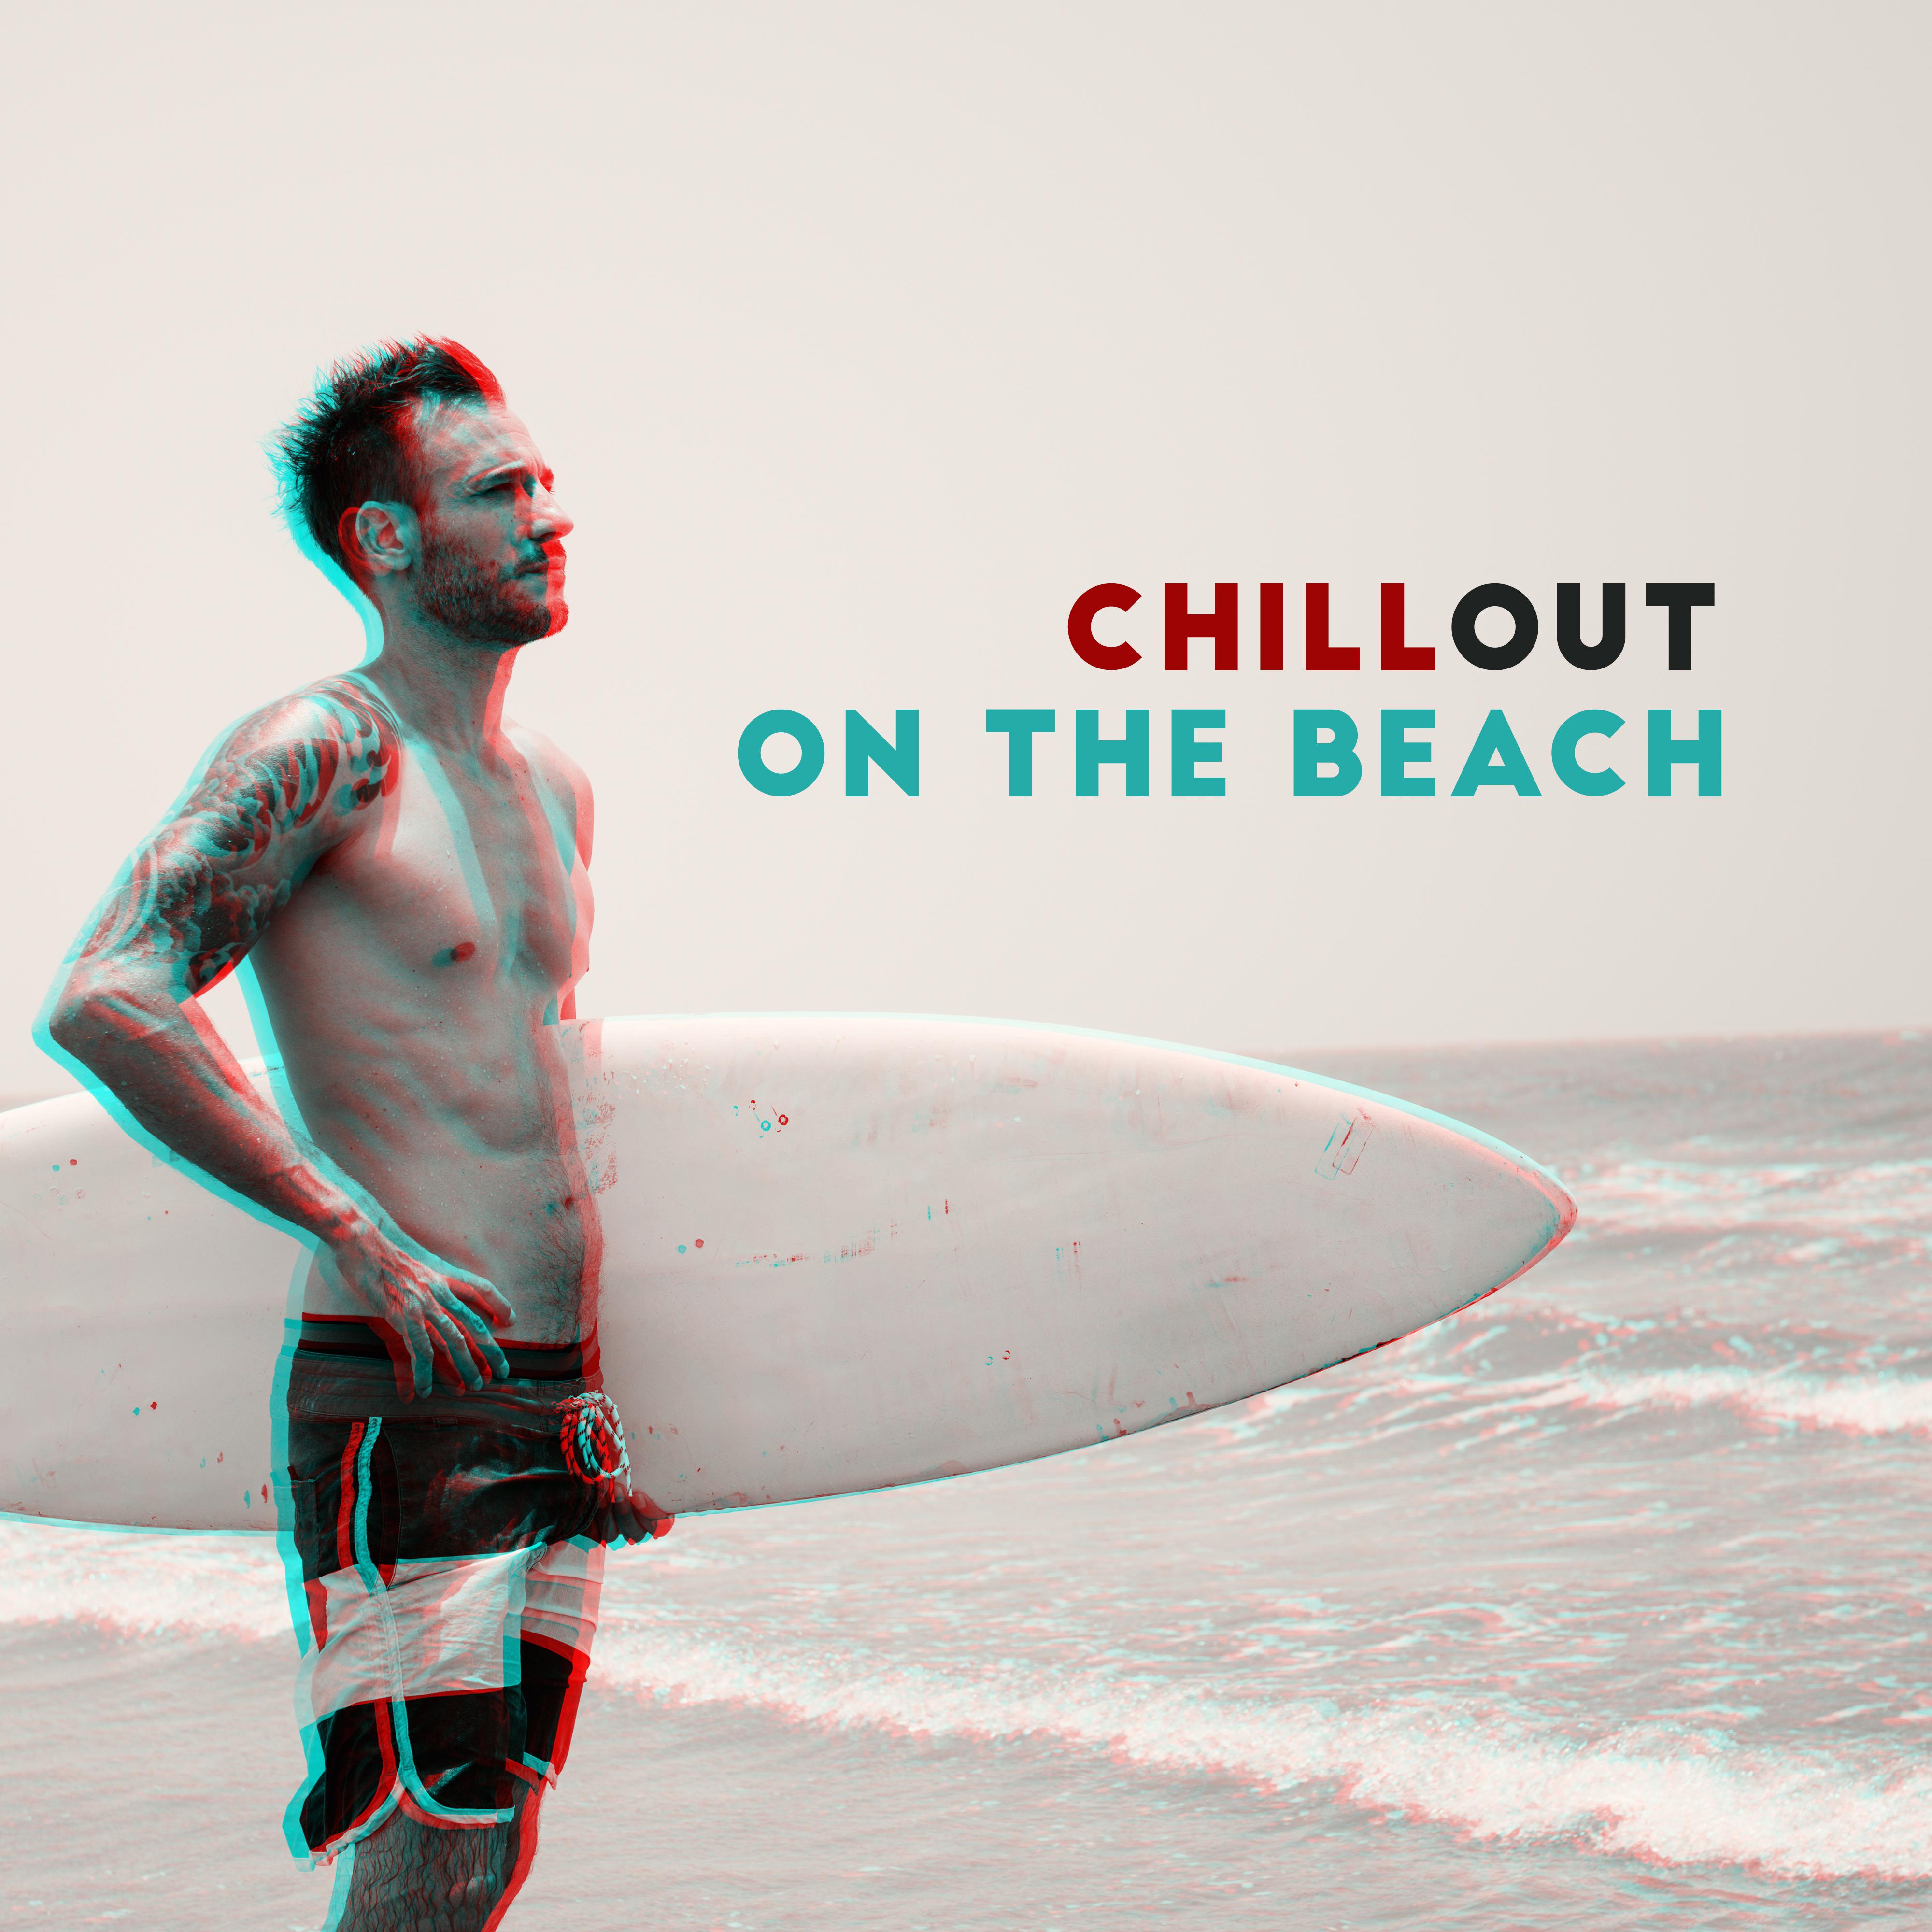 Chillout on the Beach: Top 2019 Ambients & Chill Out Beats for Summer Holiday Relaxation, Tropical Positive Vibes